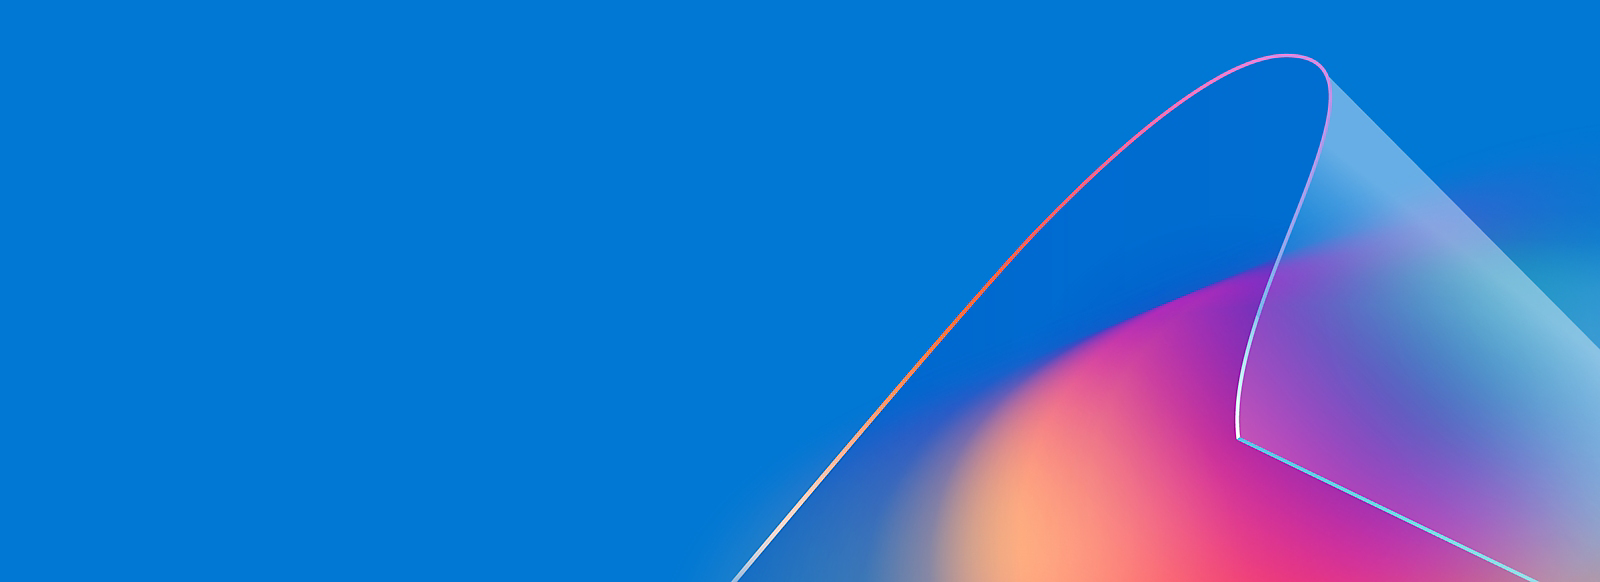 Abstract gradient background with flowing shapes in blue, pink, and orange hues.